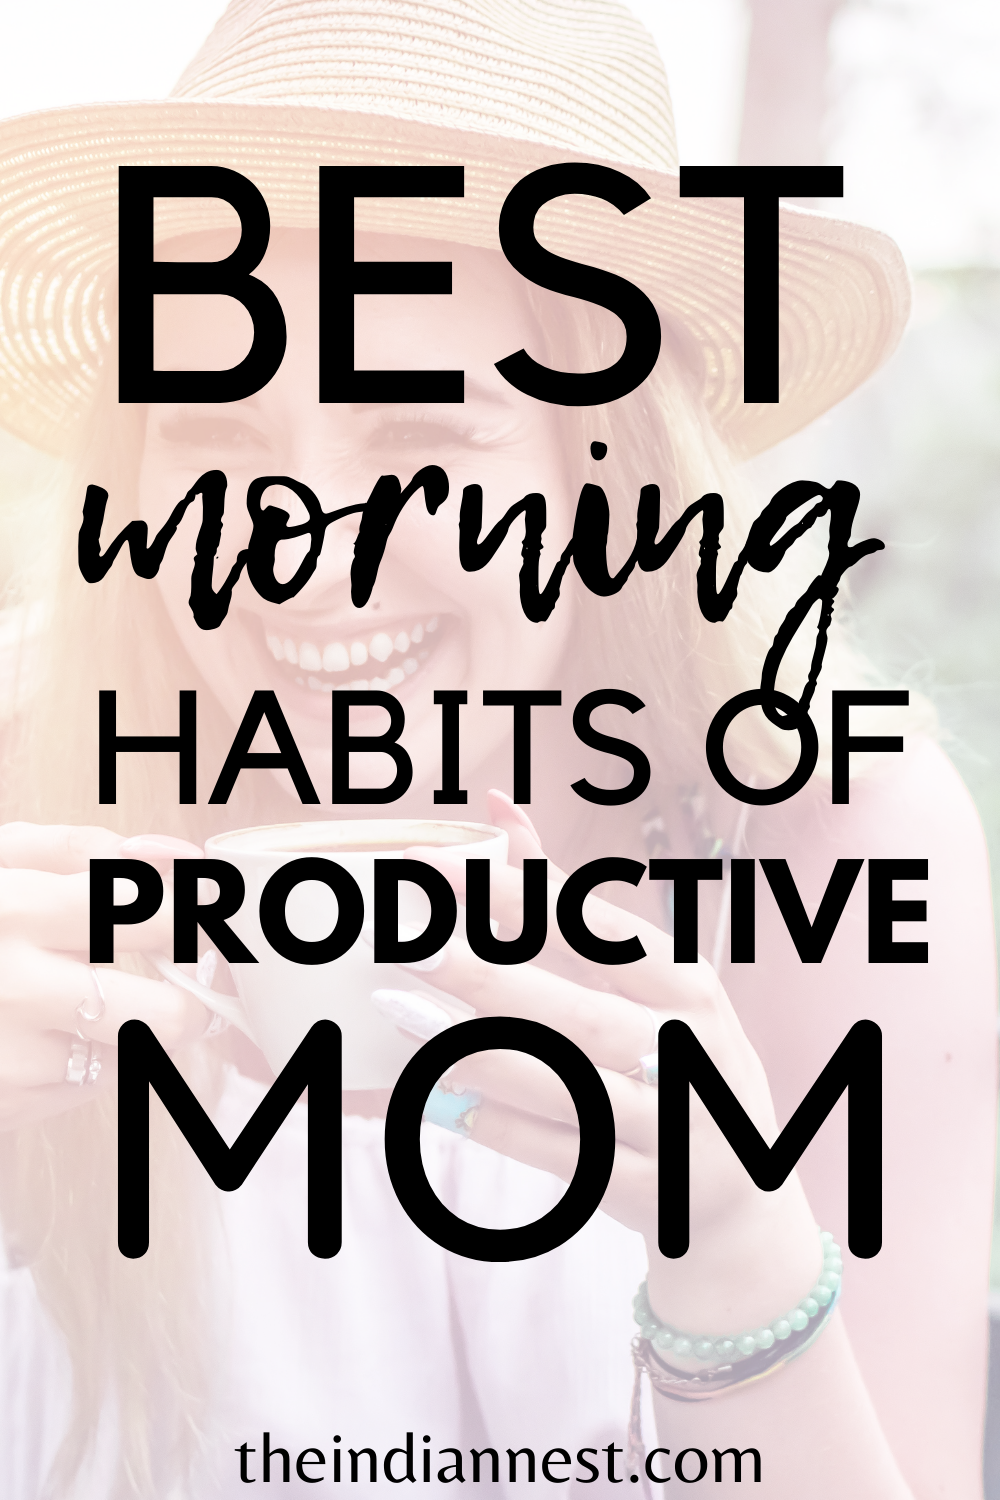 How to Start the Mom Morning Routine You Need to Be Happy and Productive. Mom morning habits and routines are so important to set the tone for the day.  I always like to start my days with prayer. Before I started getting intentional about my mornings, I'd wake up and the first thing.